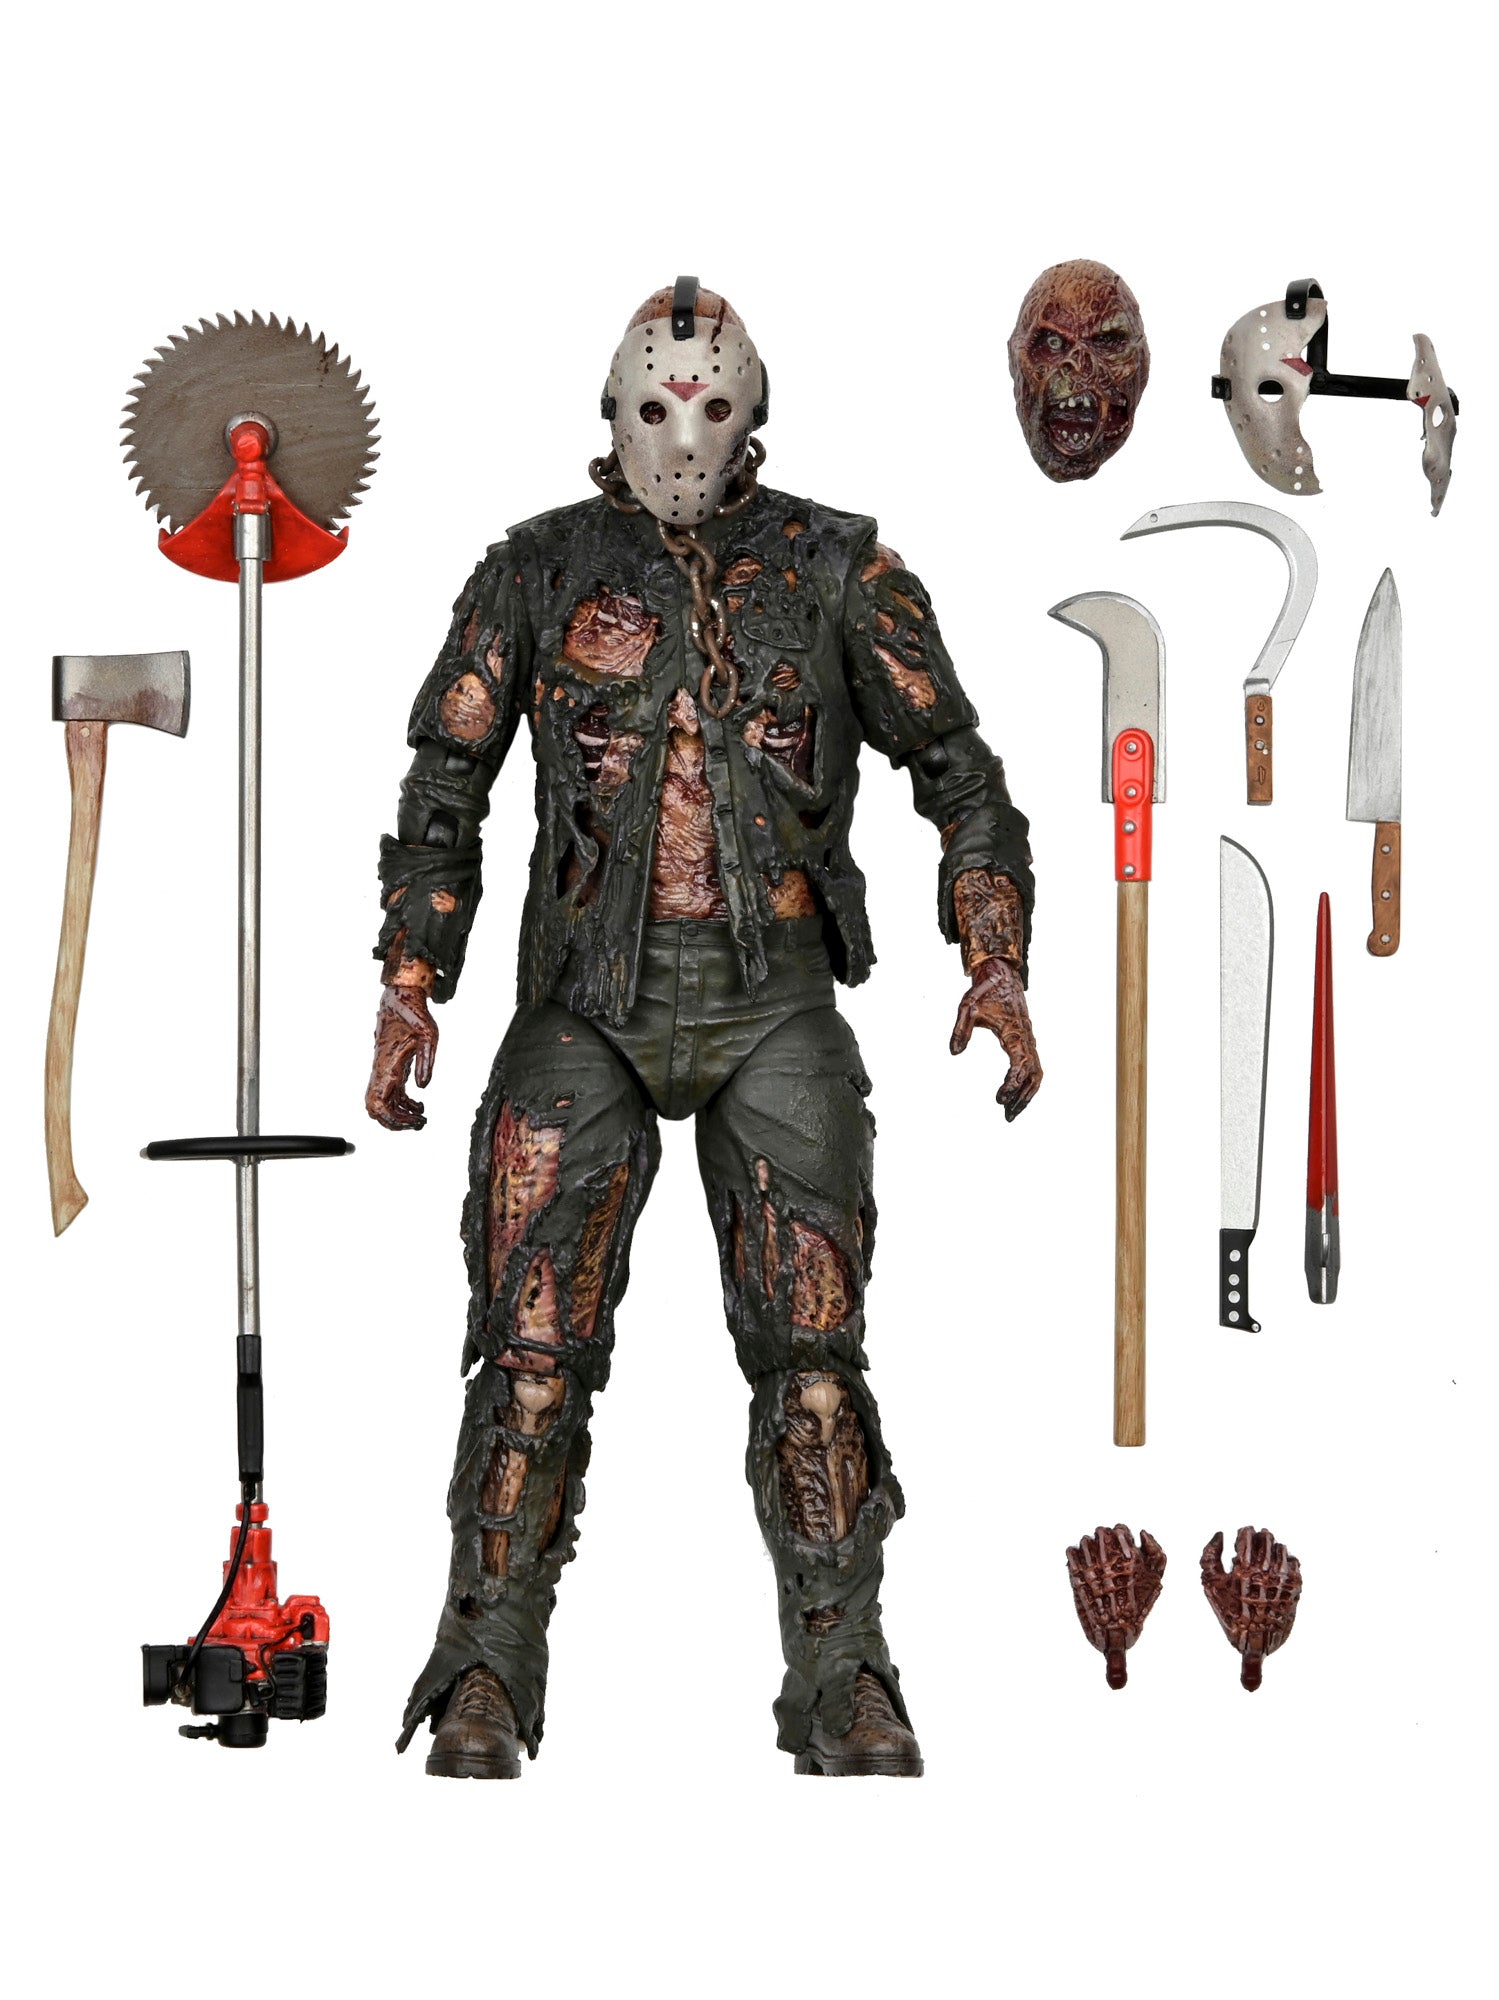 NECA - Friday the 13th - 7" Scale Action Figure - Ultimate Part 7 (New Blood) Jason - costumes.com